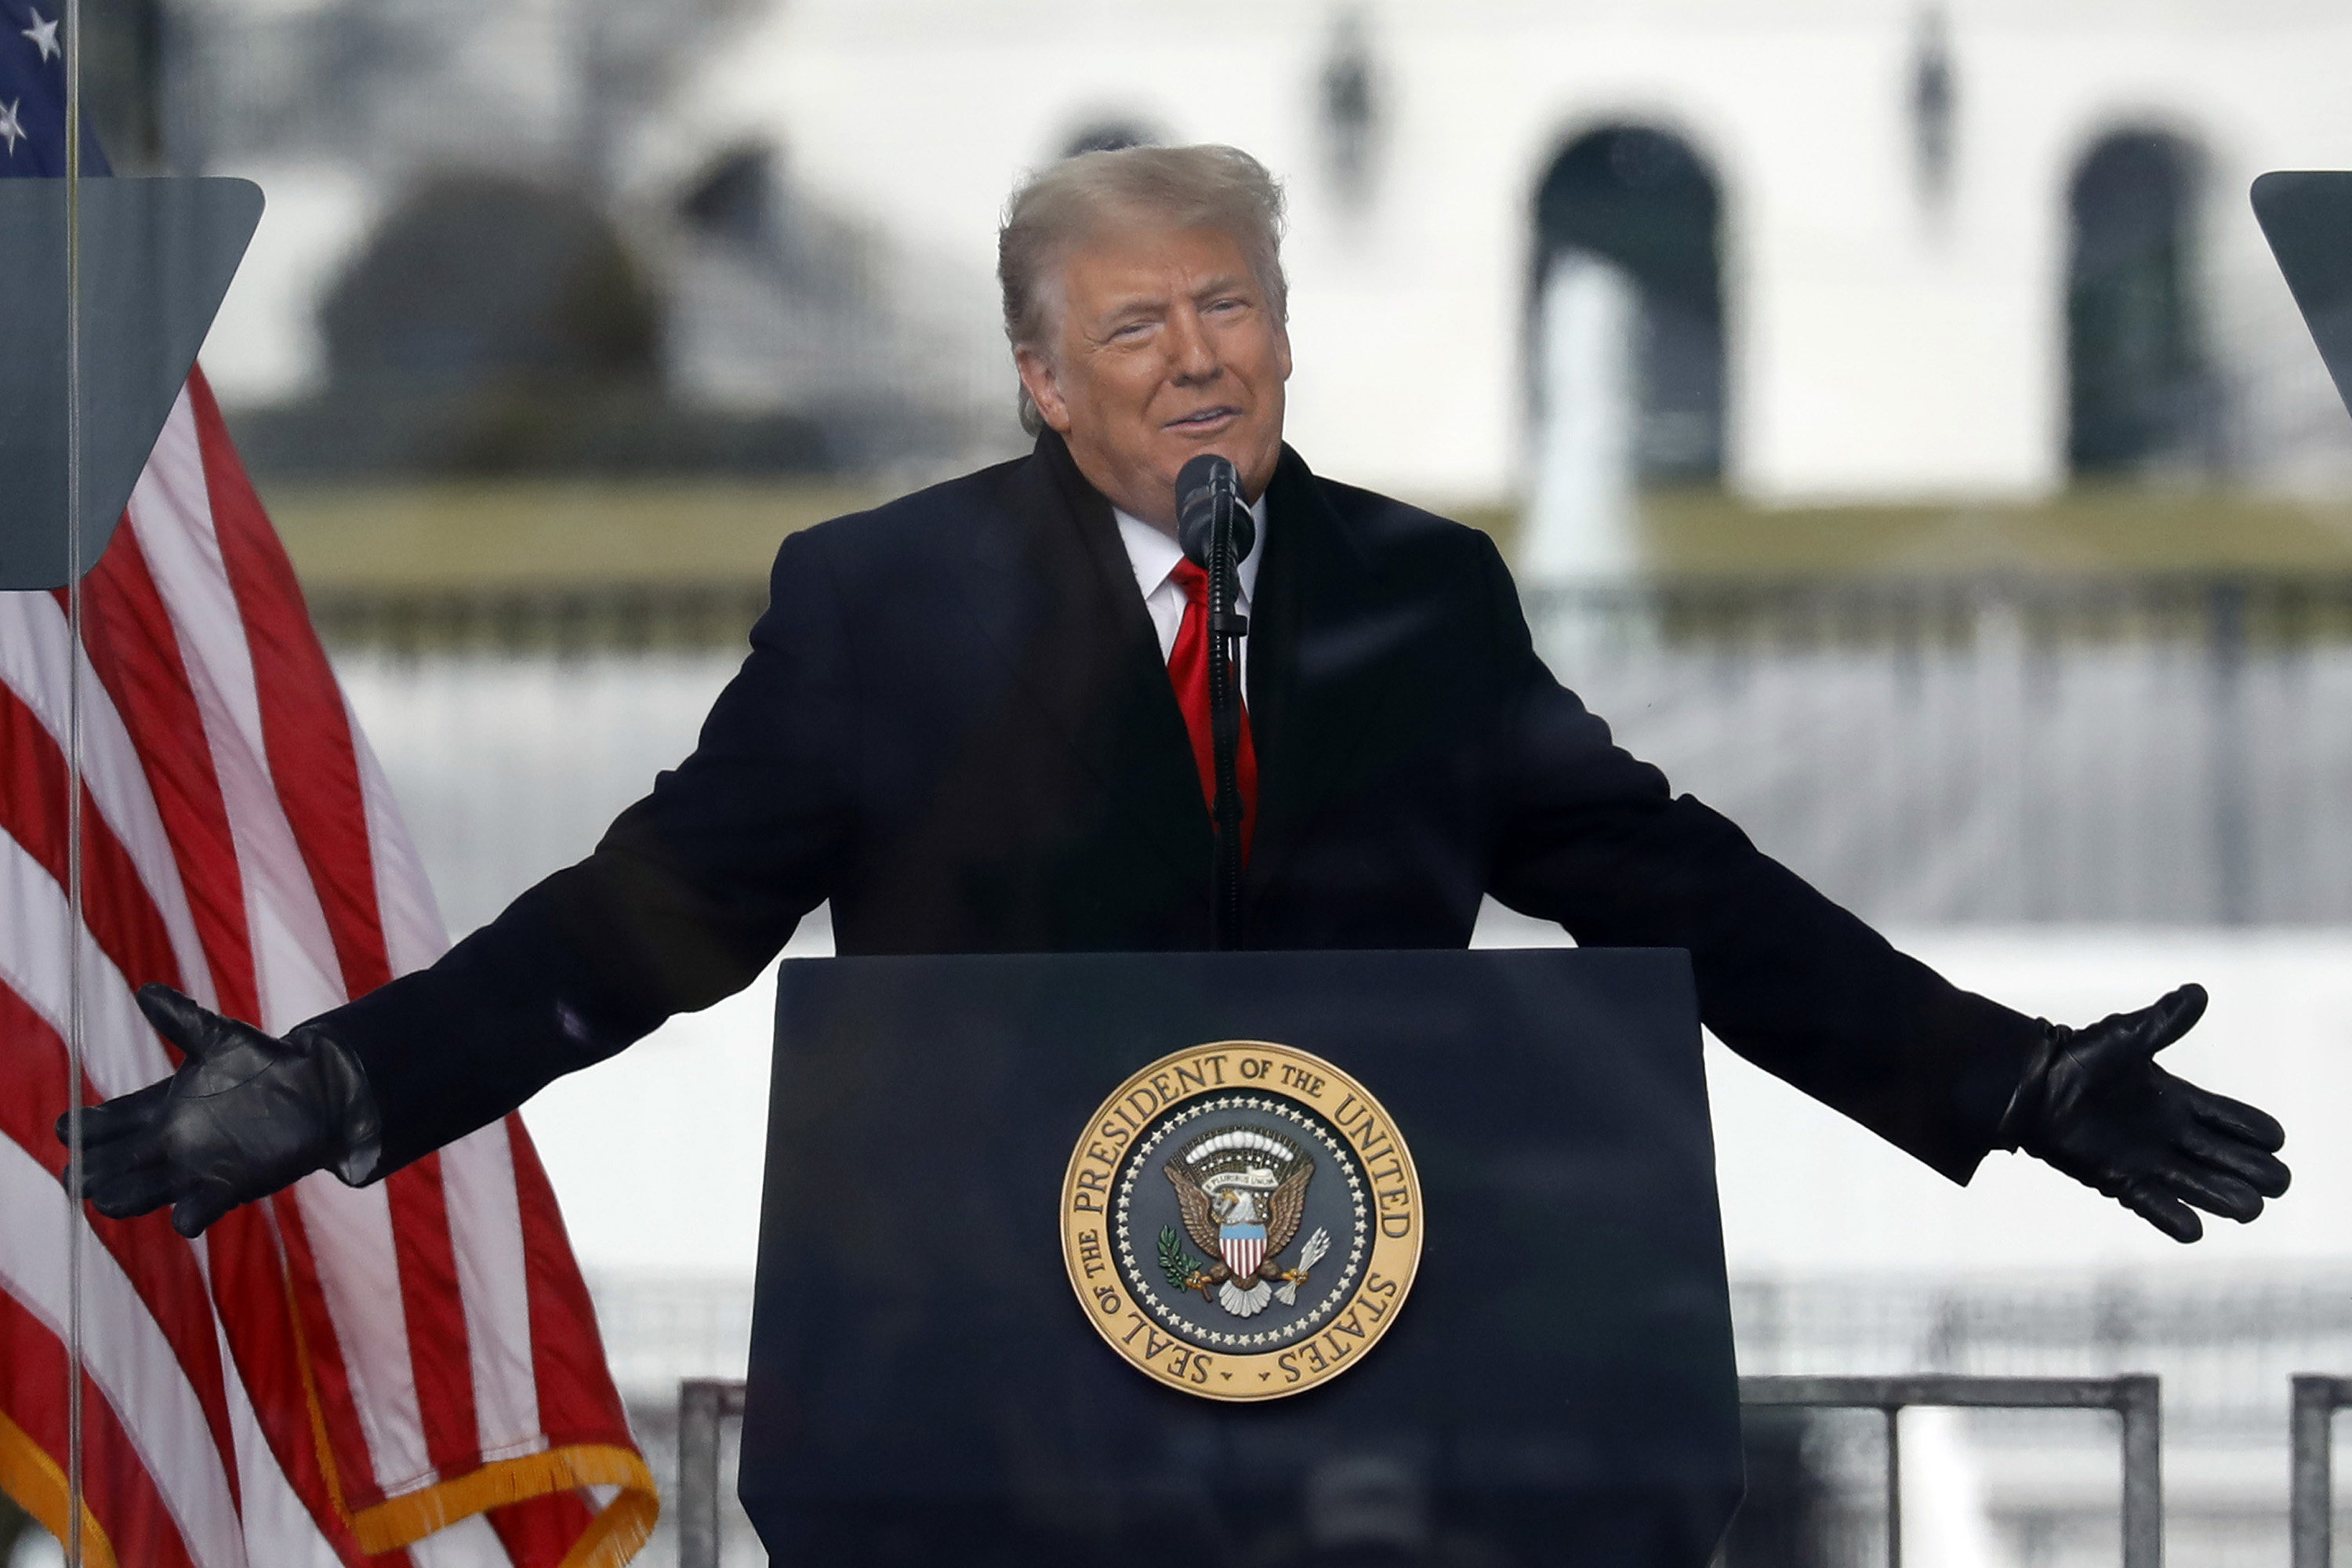 Former US president Donald Trump at a rally near the White House in Washington on January 6, 2021, before his supporters stormed the US Capitol. Photo: Abaca Press / TNS